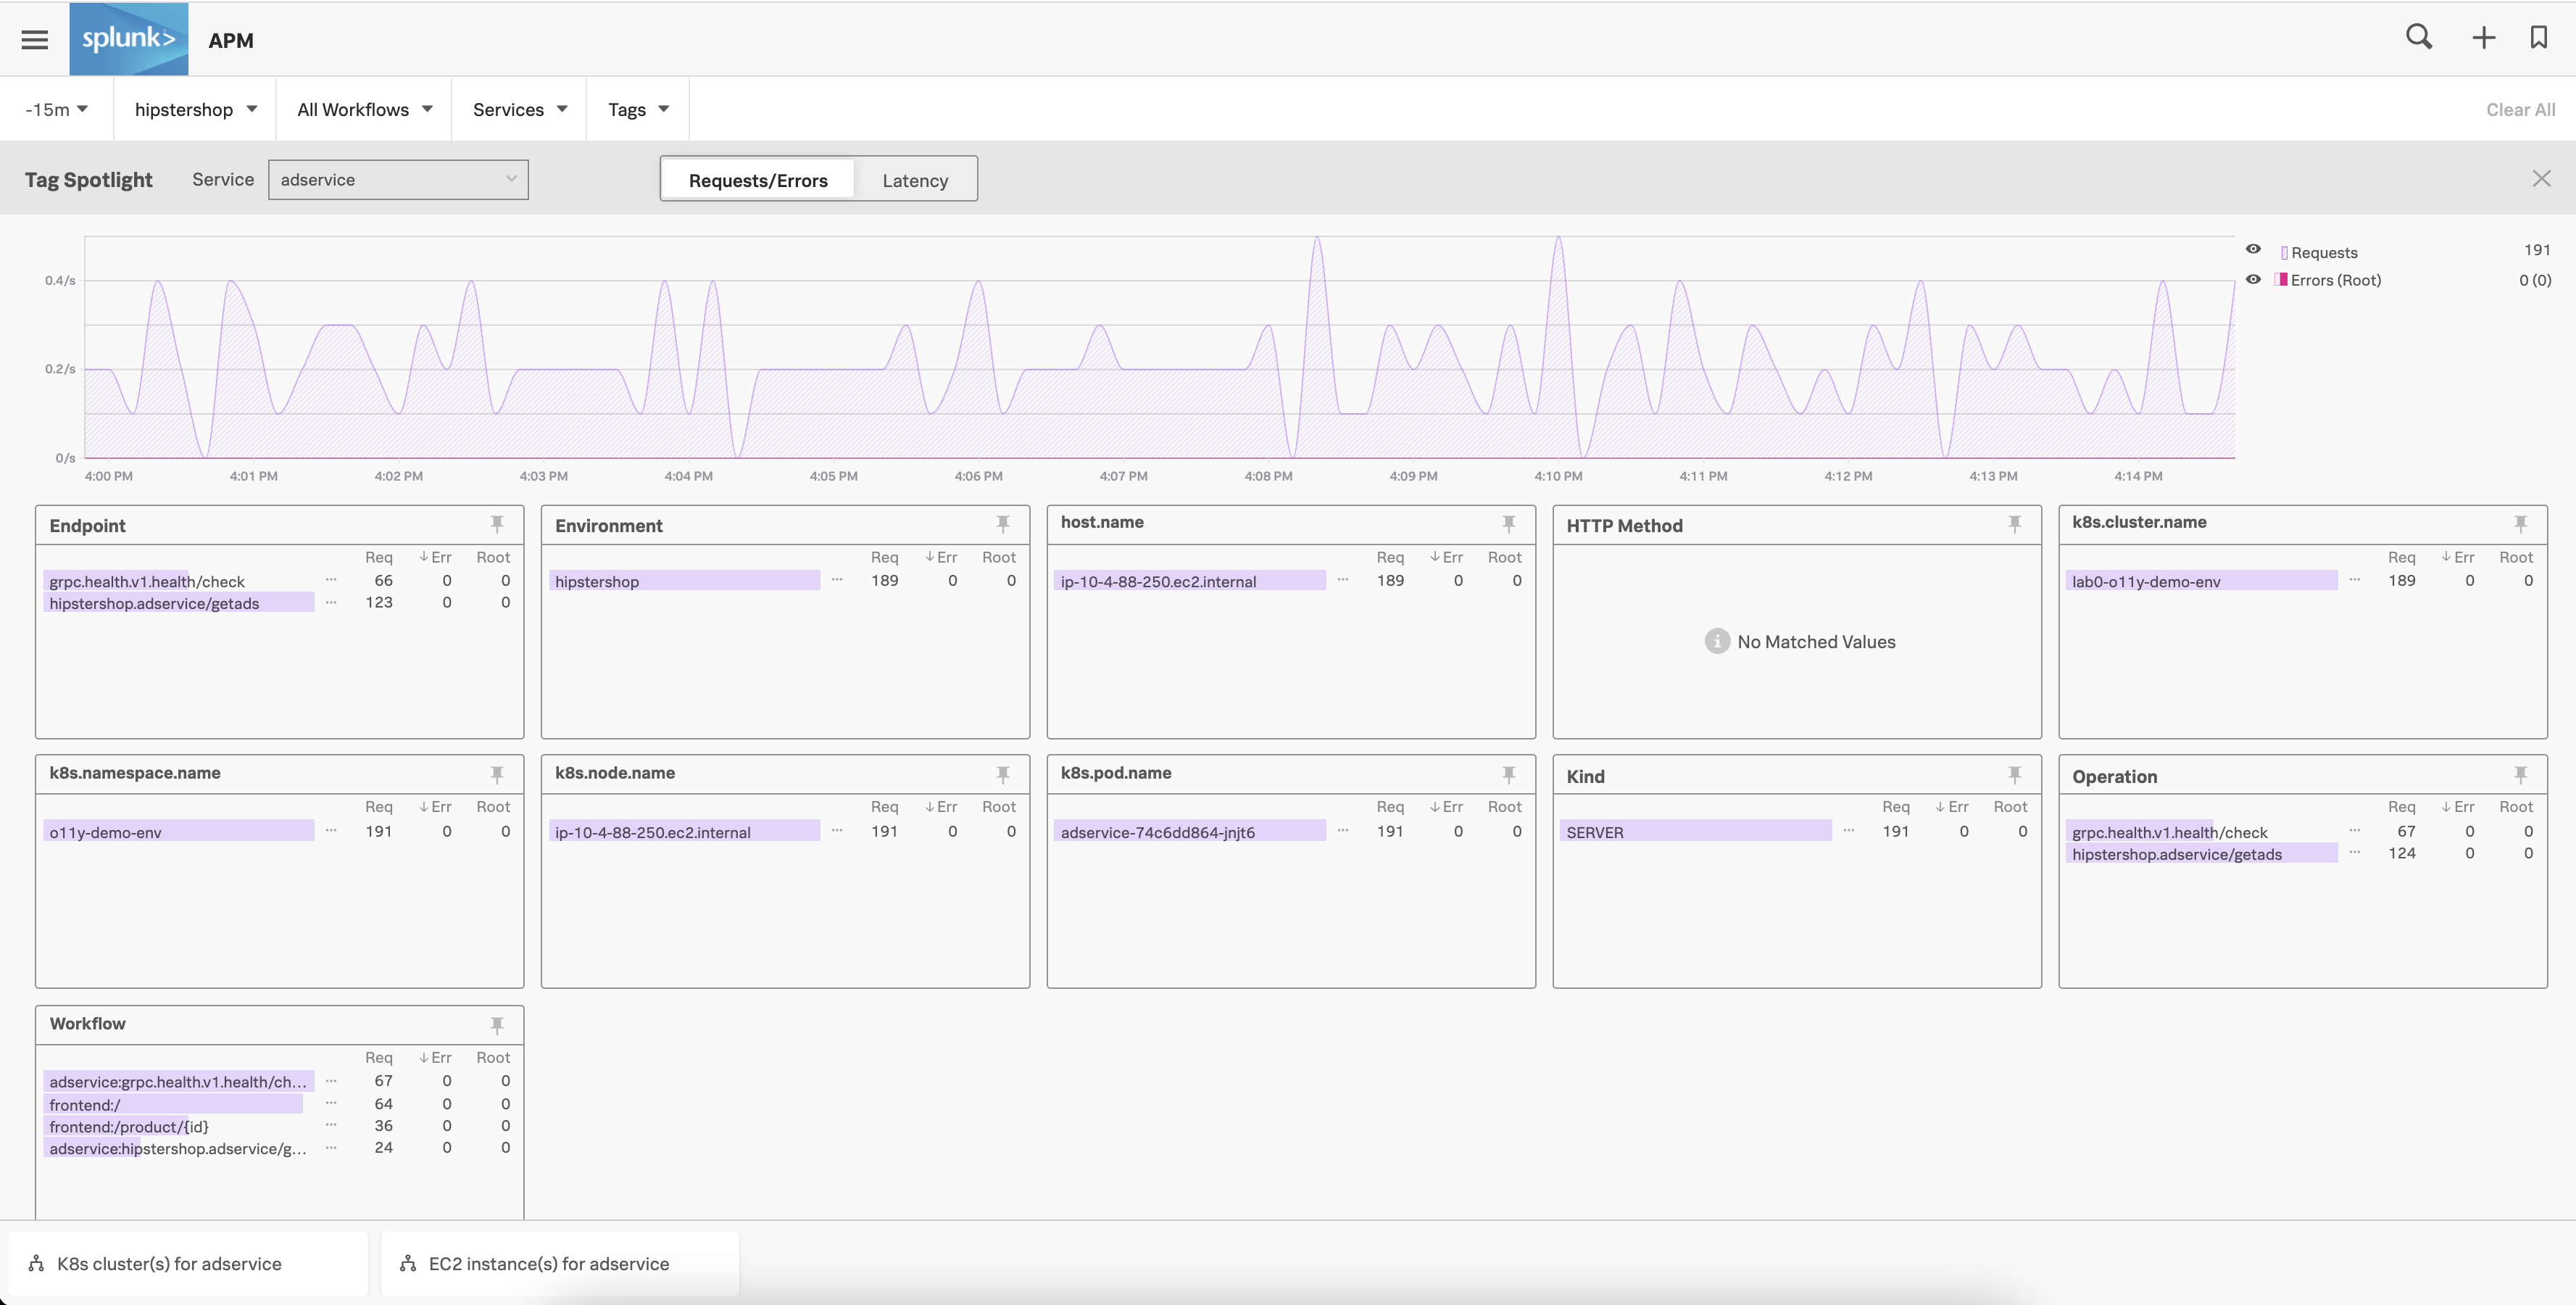 This screenshot shows an example of Splunk APM Tag Spotlight view